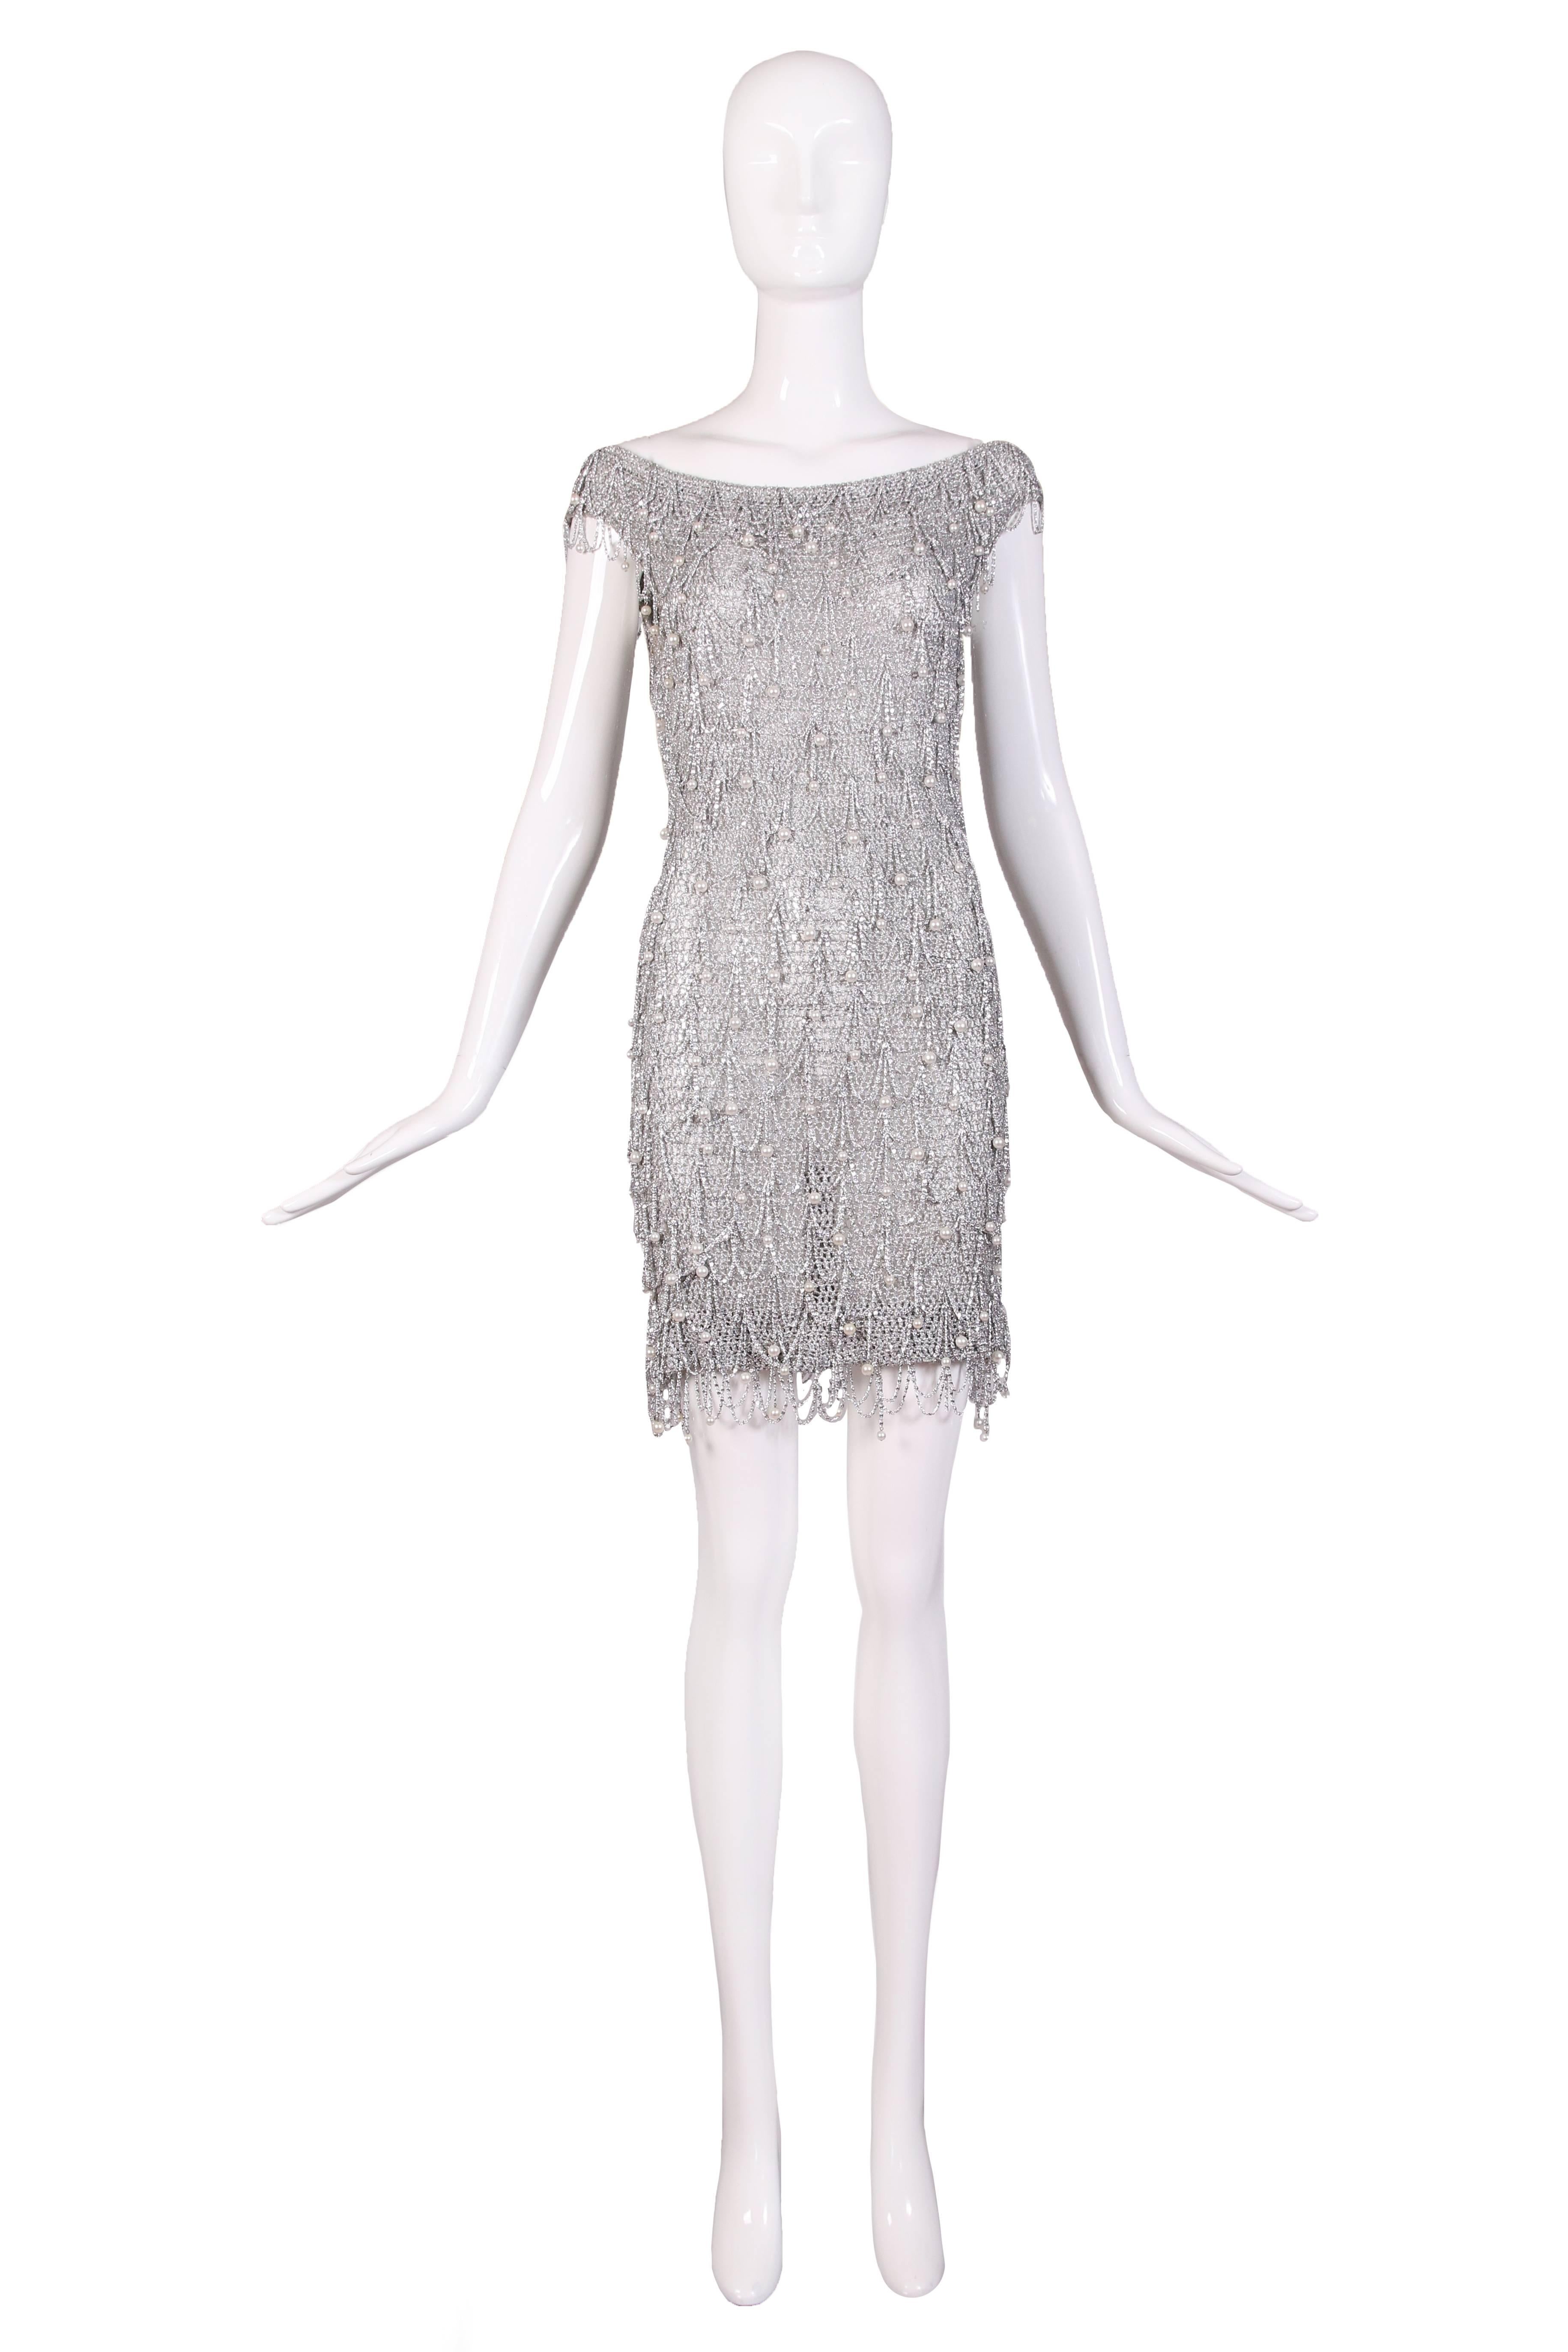 1970's unlabeled Loris Azzaro silver mesh, chain and beaded bodycon mini dress. There is no size tag but this will fit a small or extra small. In excellent condition.